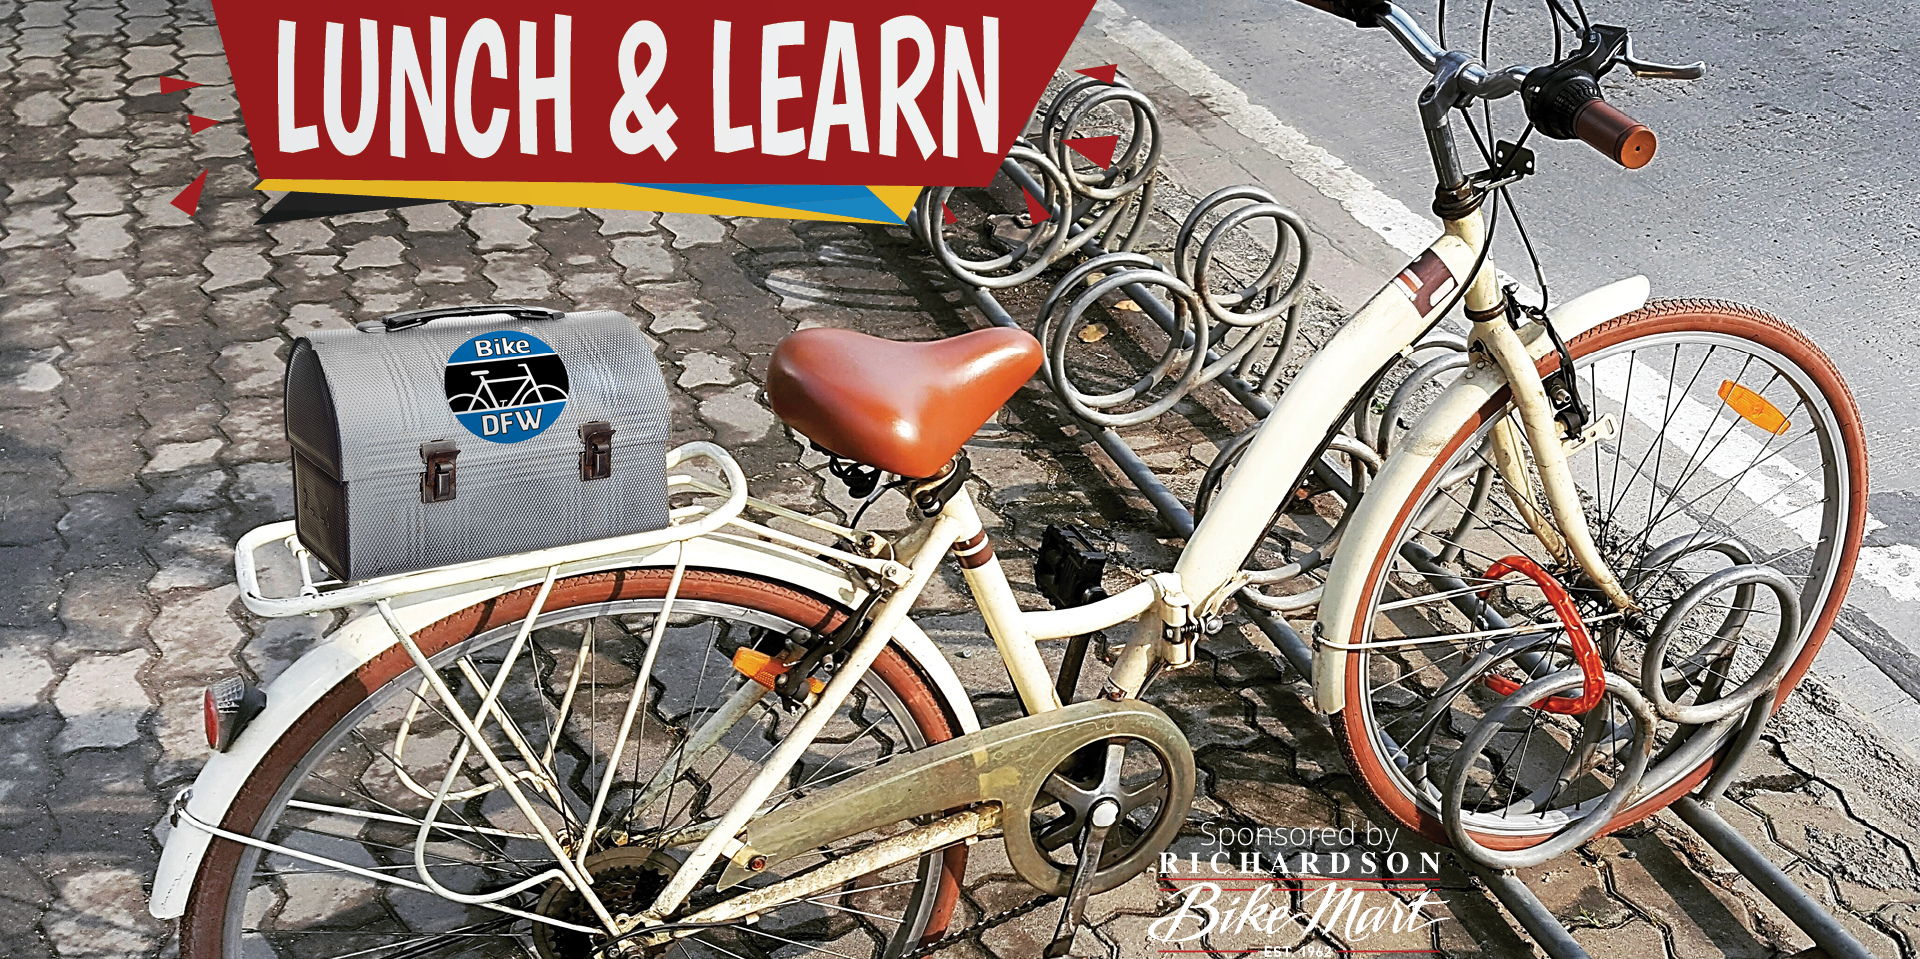 BikeDFW Lunch & Learn Virtual Series Presents: Becoming a League Cycling Instructor promotional image